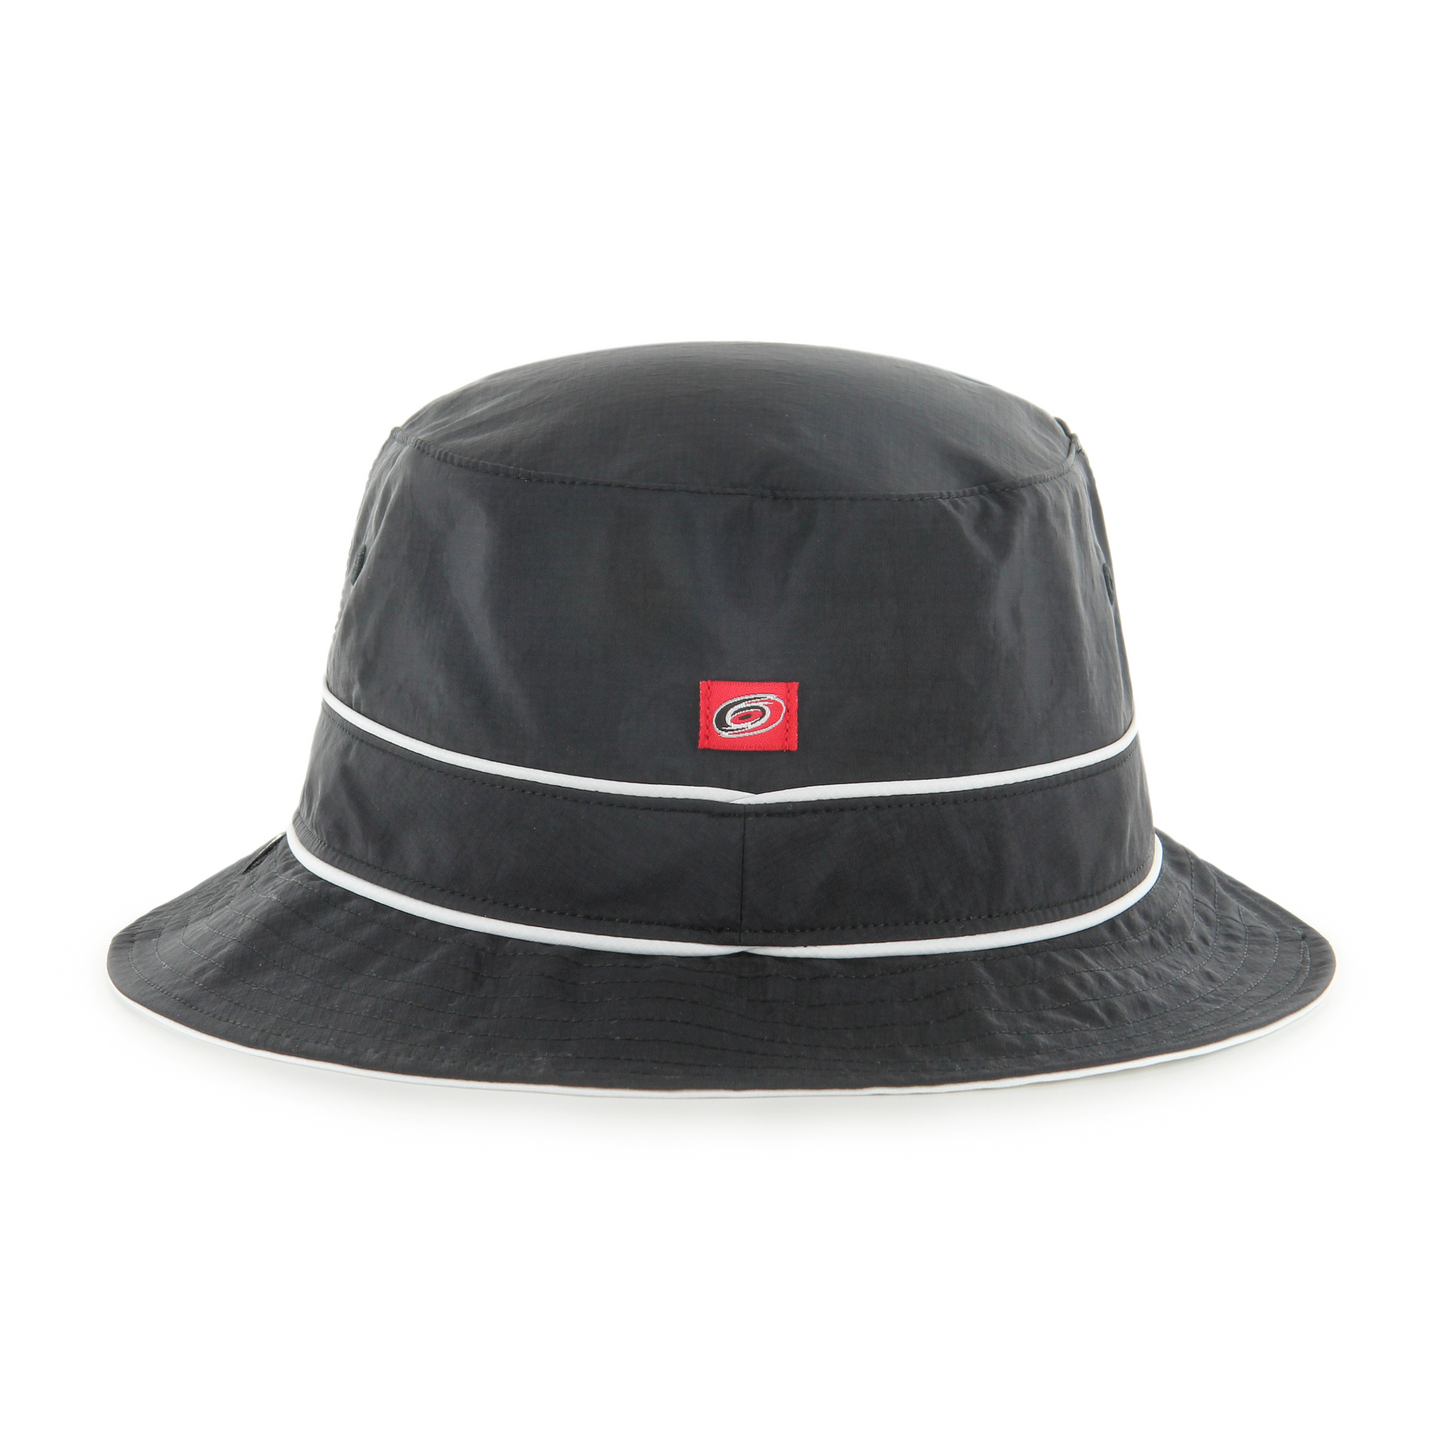 Back: Black Bucket Hat White Stripes small red patch with hurricanes primary logo